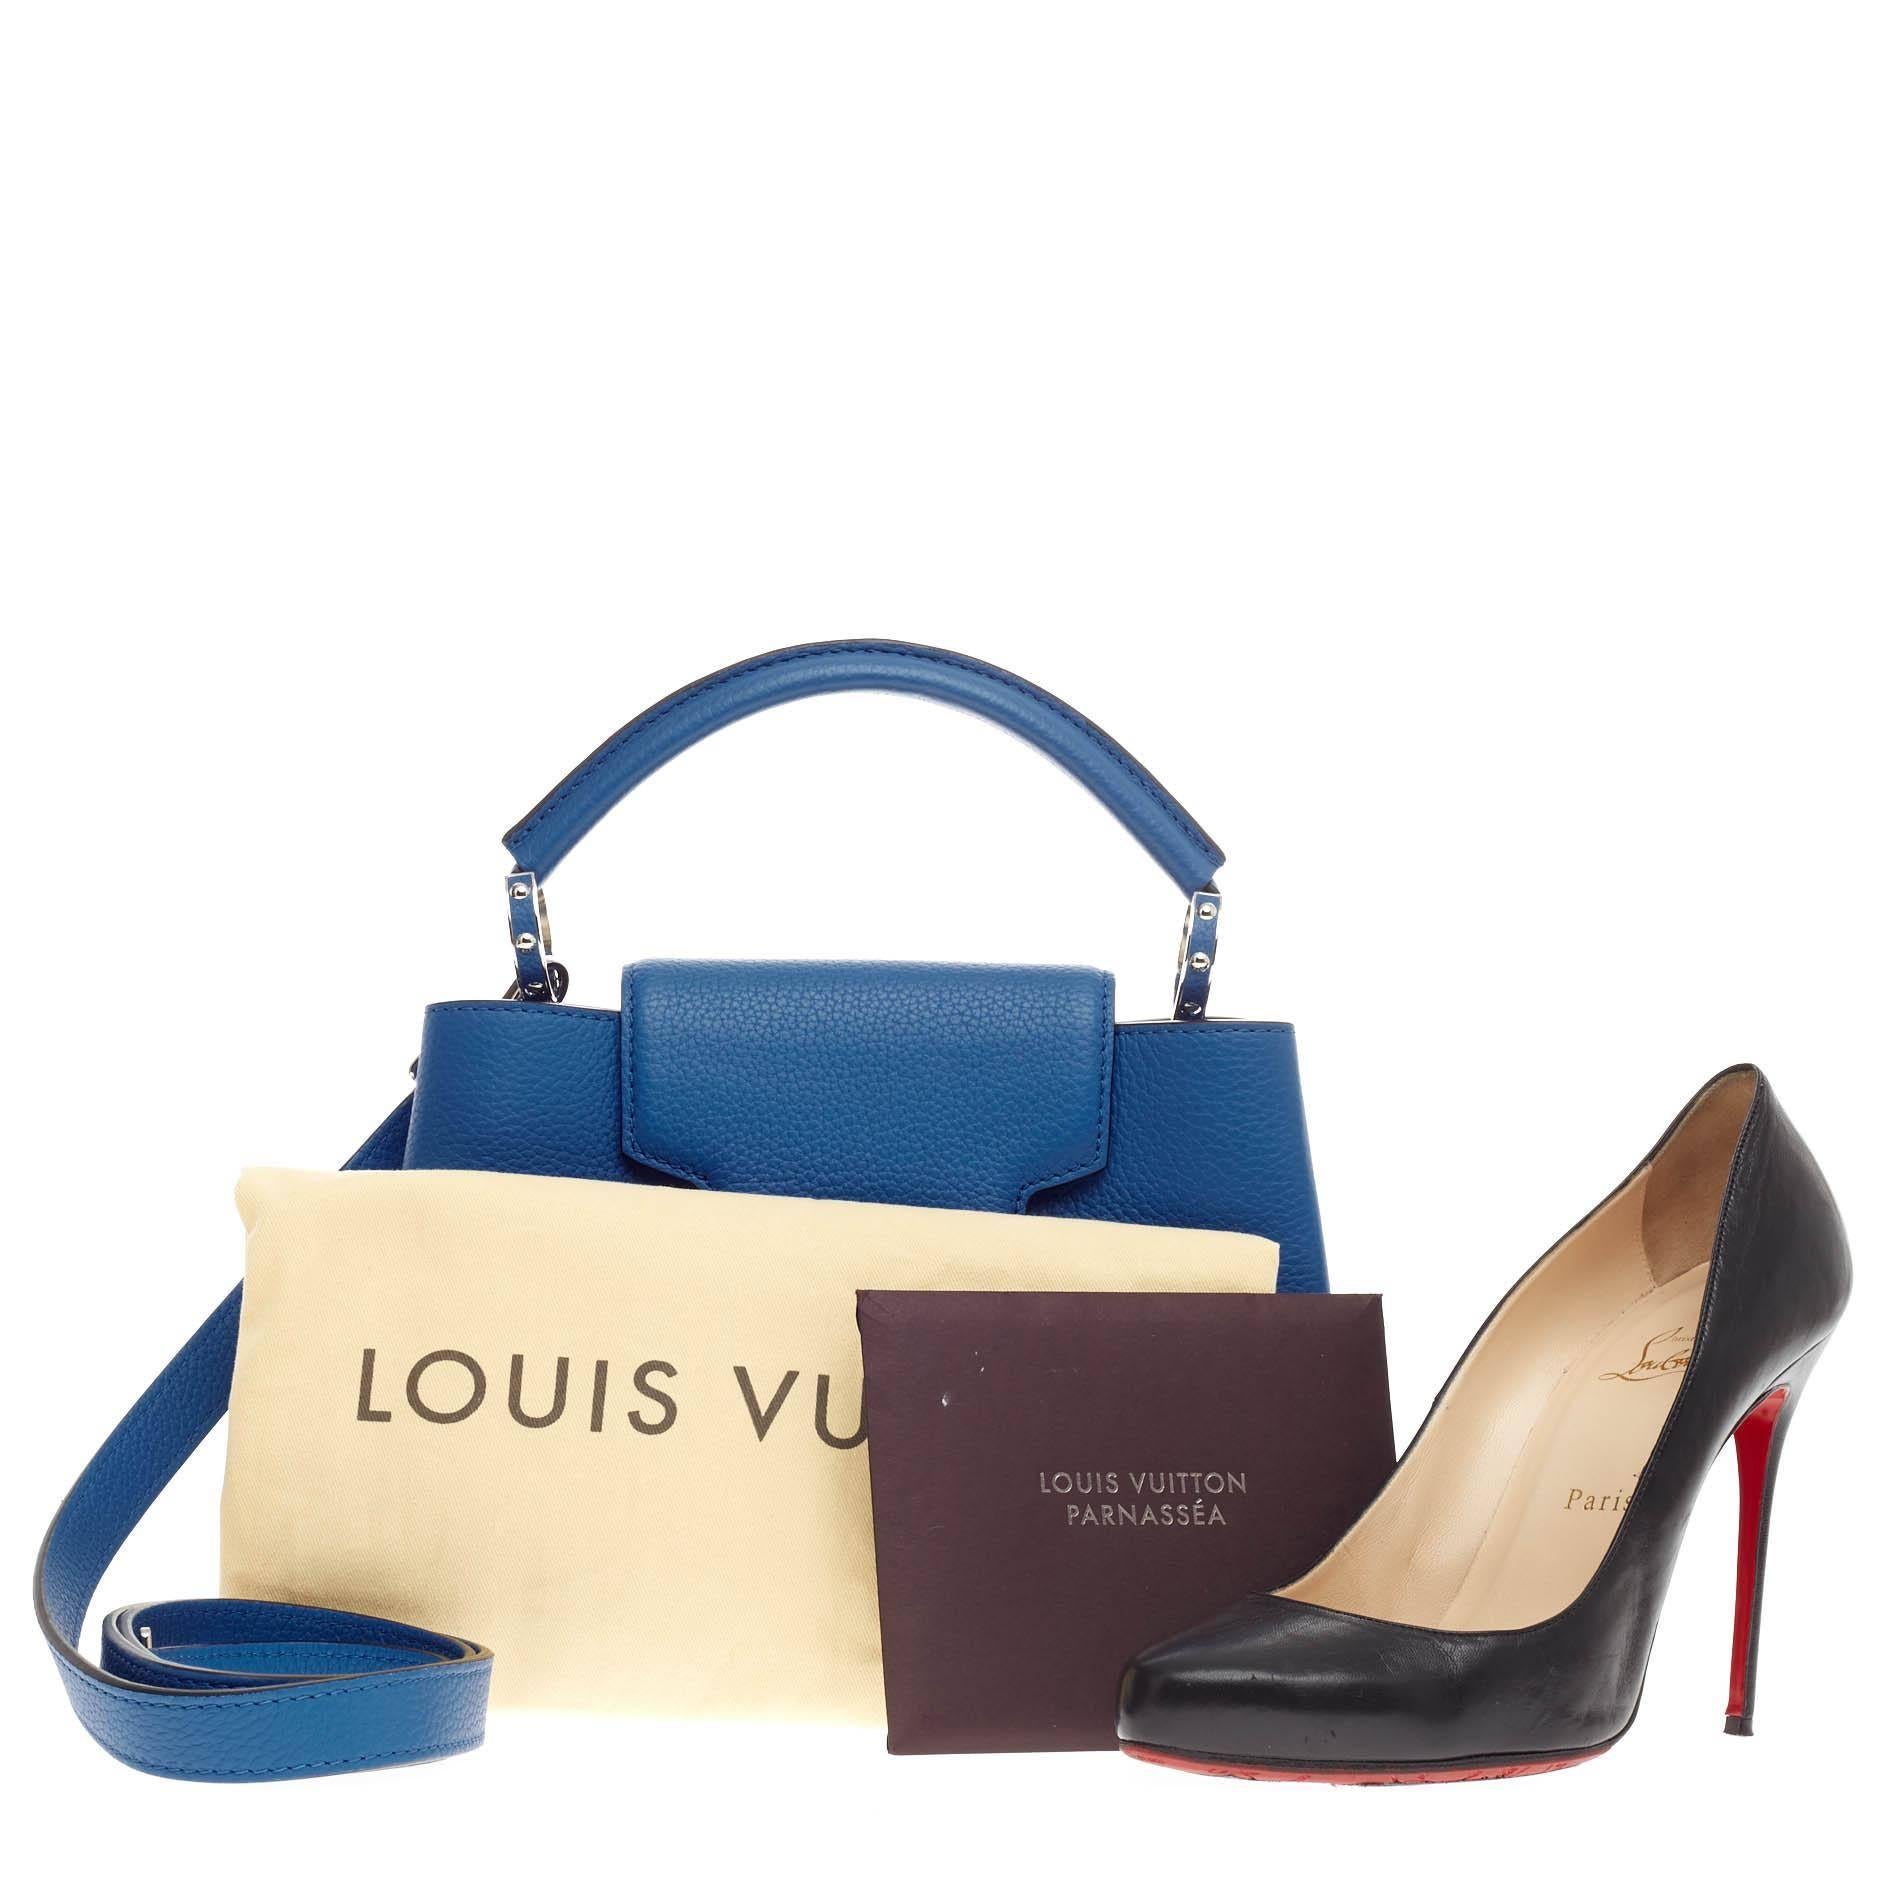 This authentic Louis Vuitton Capucines Leather BB is sophisticated and fresh in design from the brand's Fall 2013 Collection inspired by its Parisian heritage. Crafted in outremer royal blue taurillon leather, this ultra-chic petite bag features a